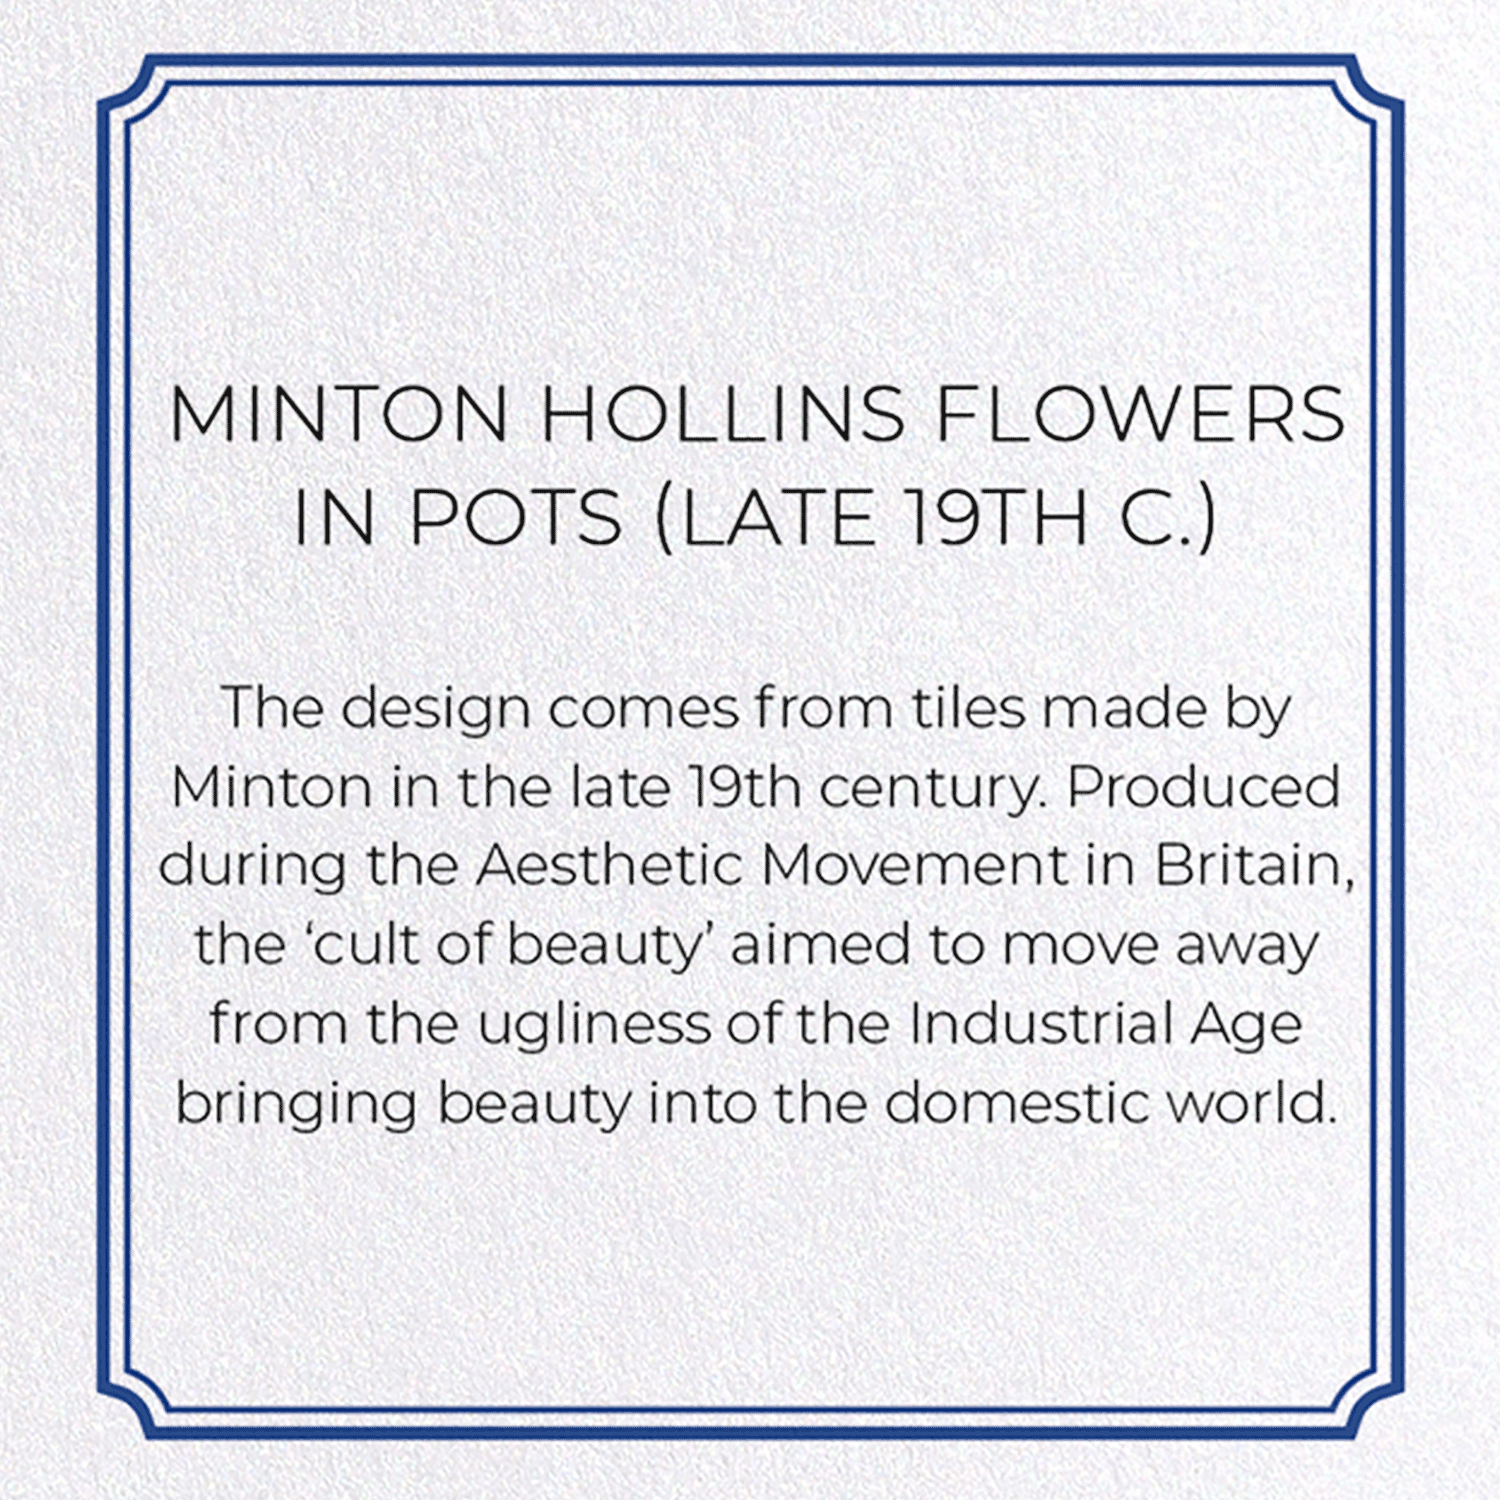 MINTON HOLLINS FLOWERS IN POTS (LATE 19TH C.): Painting Greeting Card